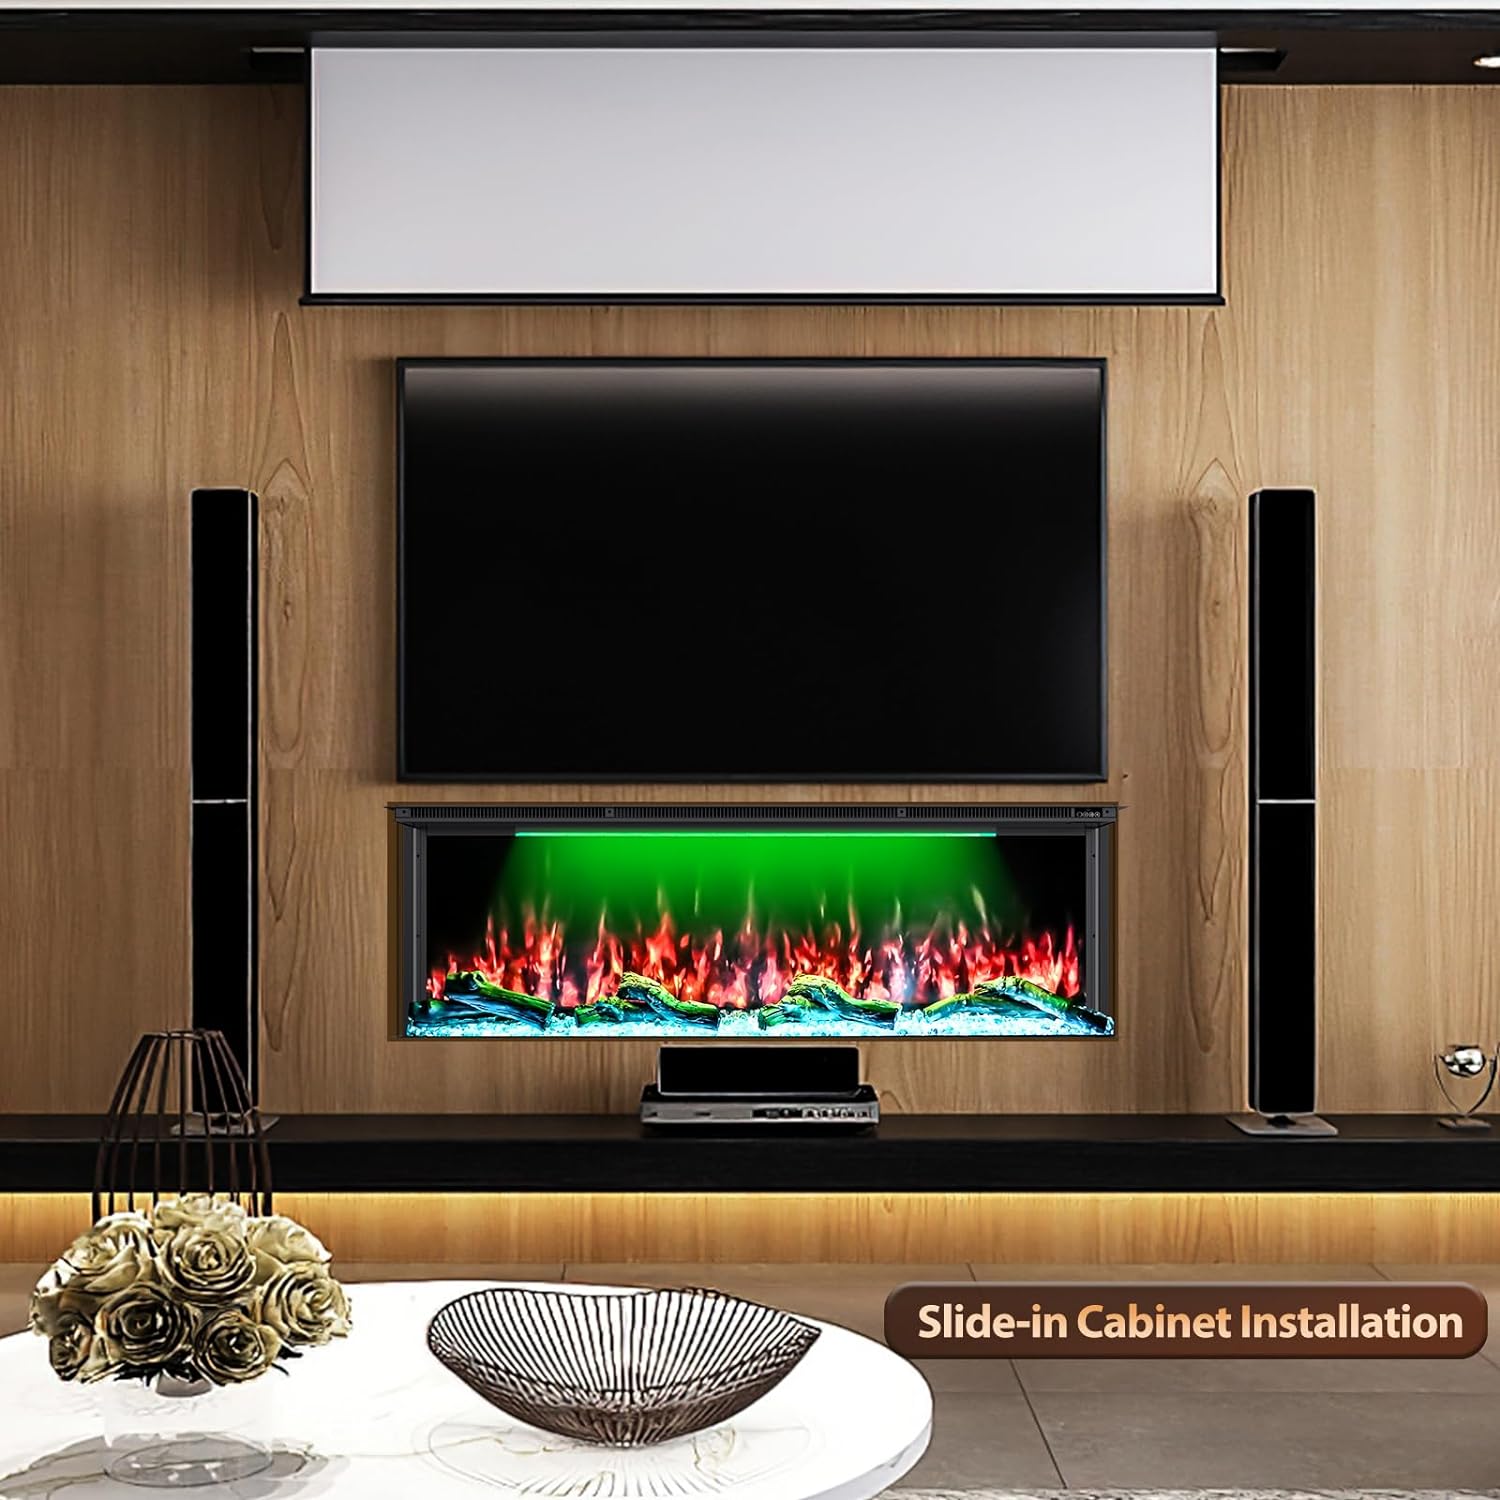 Recessed 3-Sided Electric Fireplace, 60-inch Smart WiFi 251 Flame Colors Combination Inserts Eletric Fire Place Heater for Living Room Indoor Use with Remote Control, Log & Crystals, Black